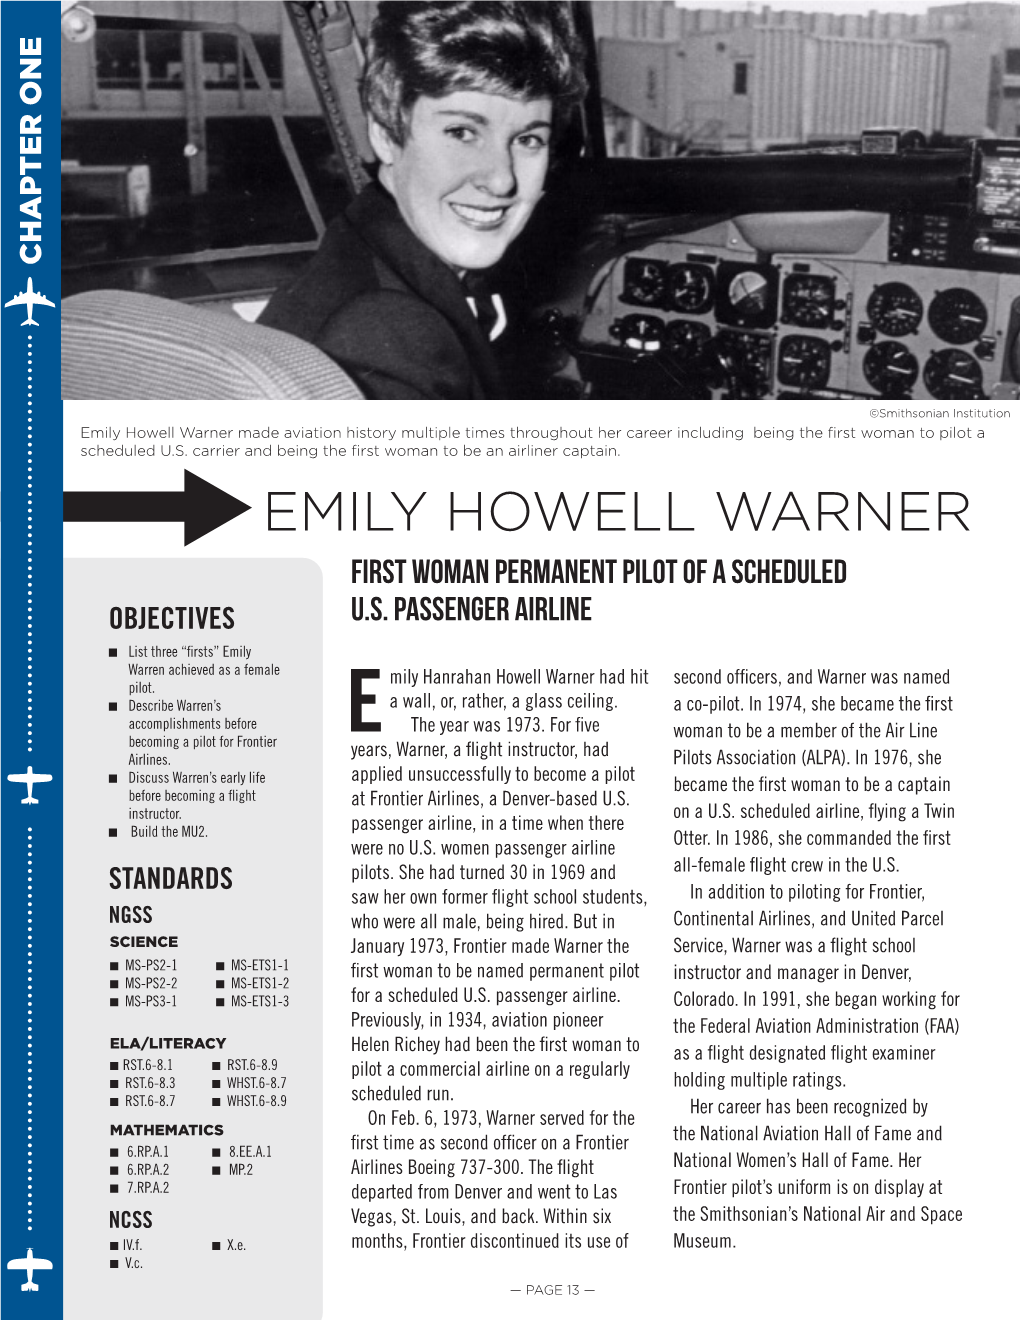 Emily Howell Warner Made Aviation History Multiple Times Throughout Her Career Including Being the First Woman to Pilot a Scheduled U.S